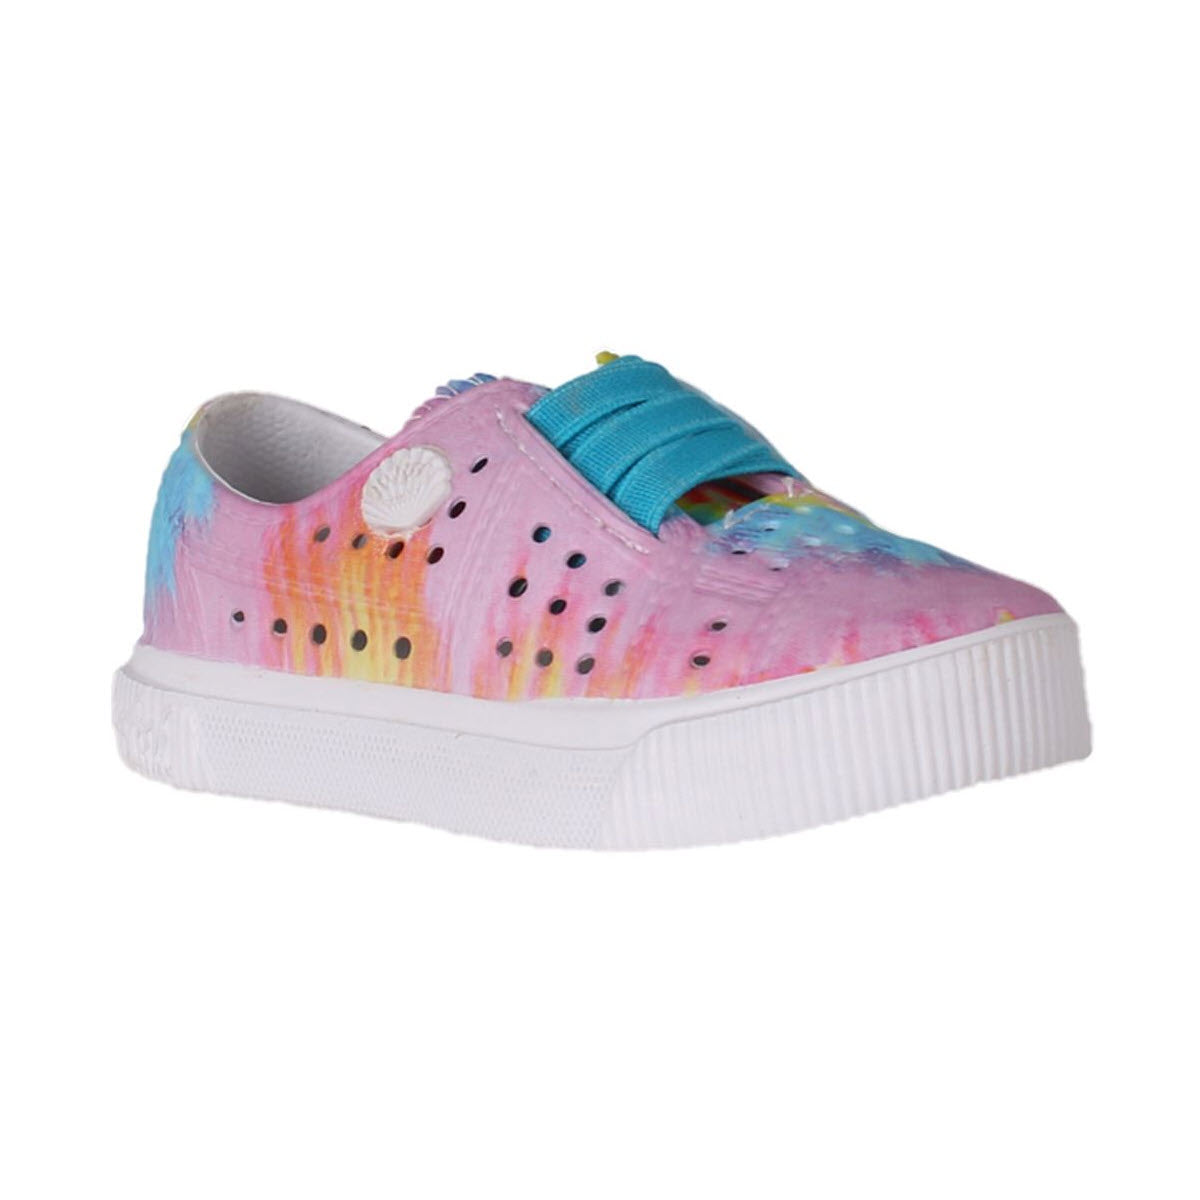 Kids&#39; Blowfish Rioo Toddlers Pastel Tie Dye Slip-On sneaker with aqua blue details and a cushioned insole.